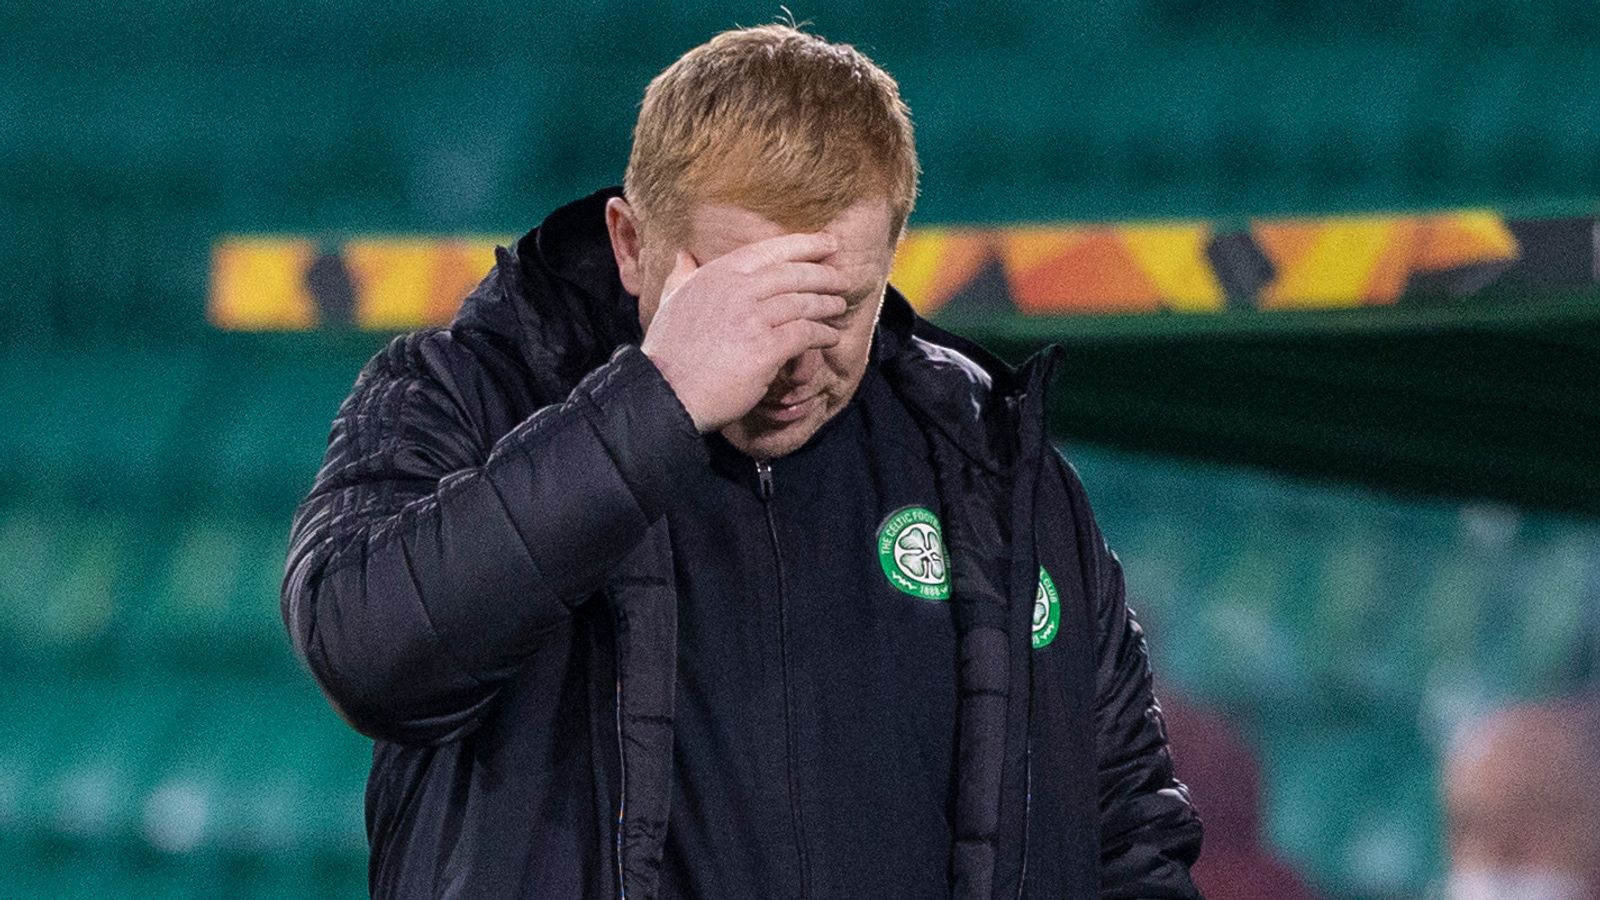 celtic-players-look-like-they-want-out-says-andy-walker-as-he-analyses-sparta-prague-defeat